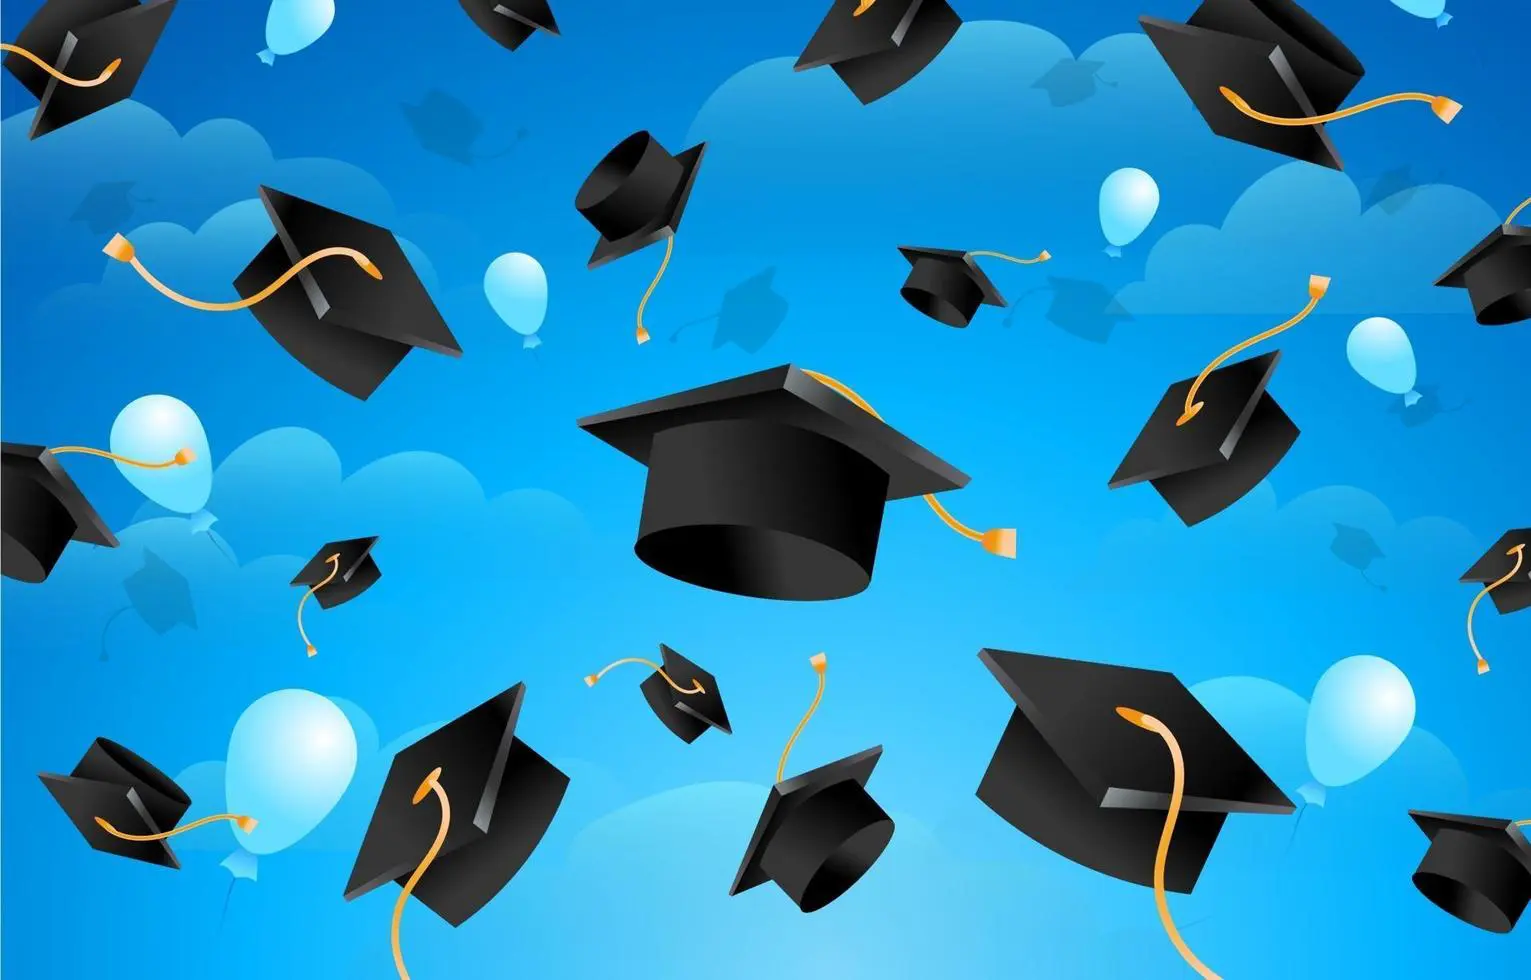 A graphically designed image of multiple graduation caps